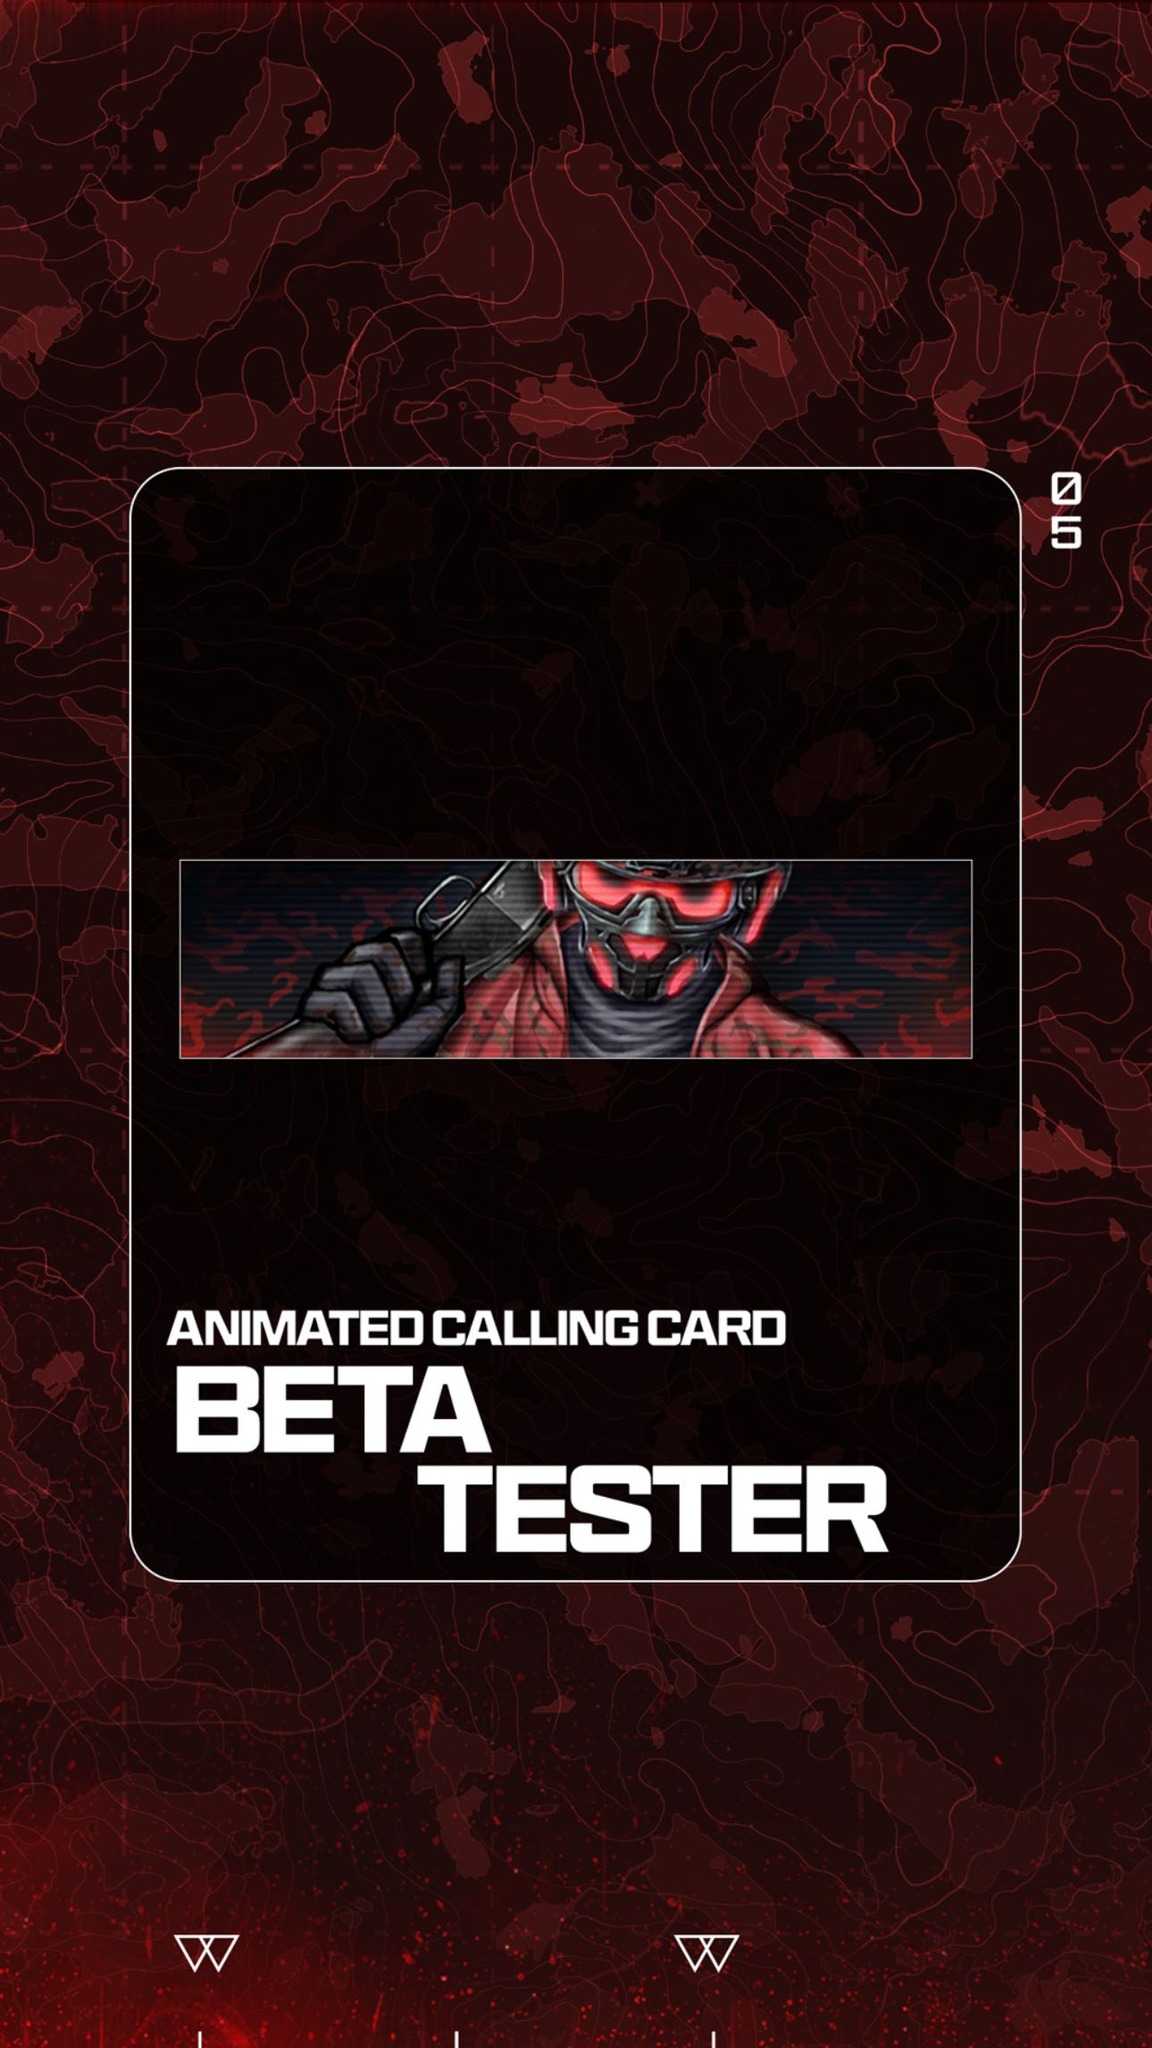 Beta calling card from MW3